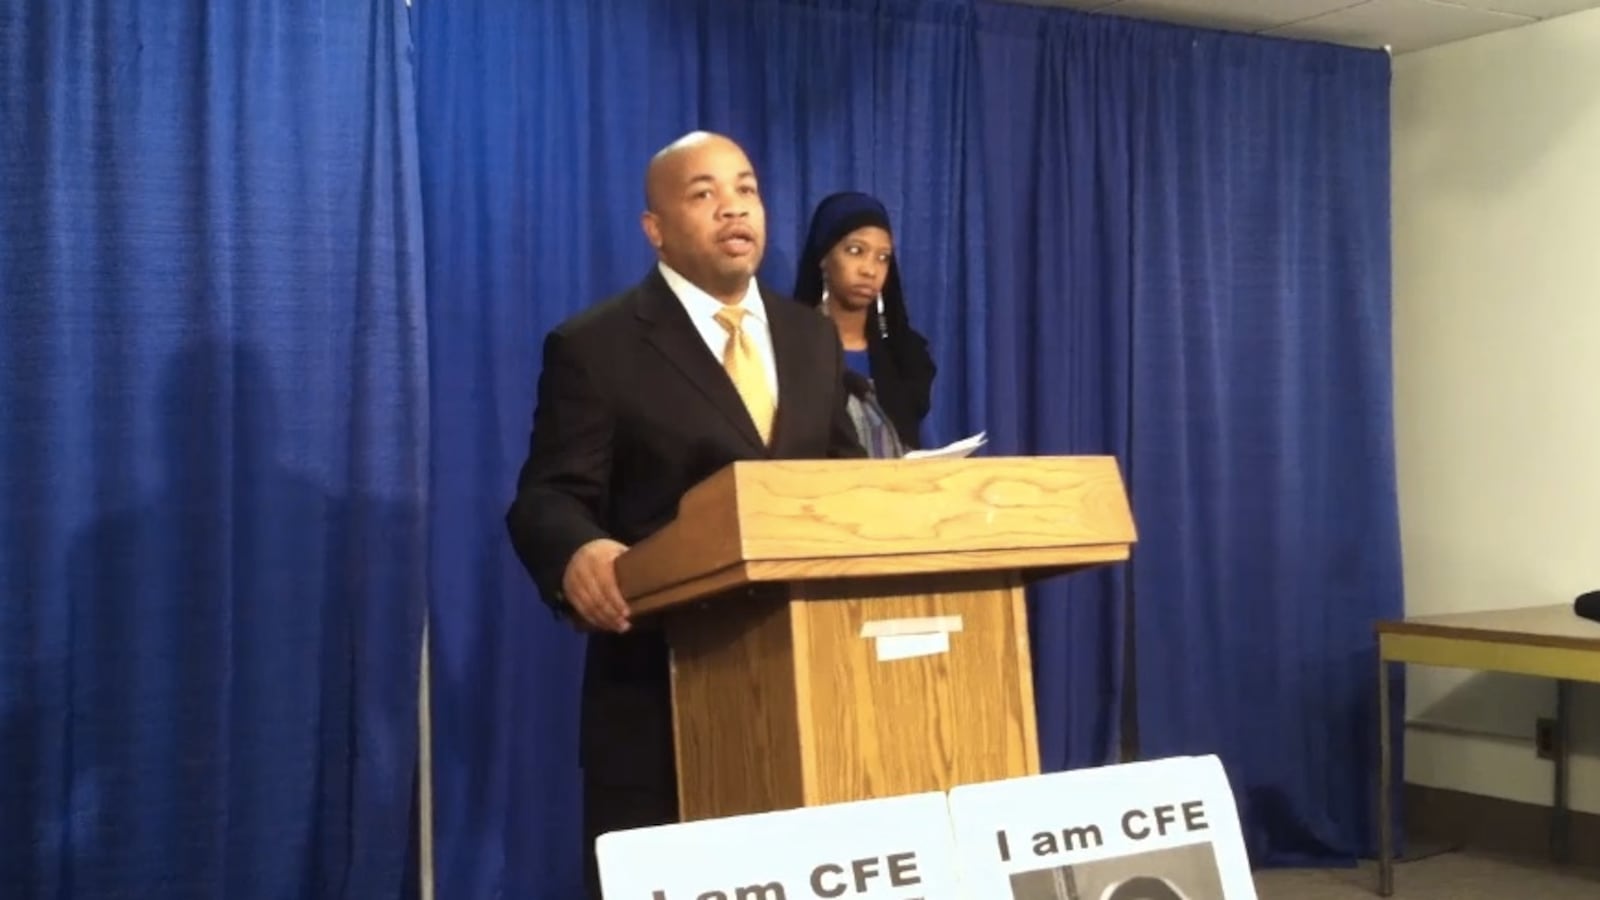 Assembly Speaker Carl Heastie, speaking at a press conference in 2012 held by  the Alliance for Quality Education.